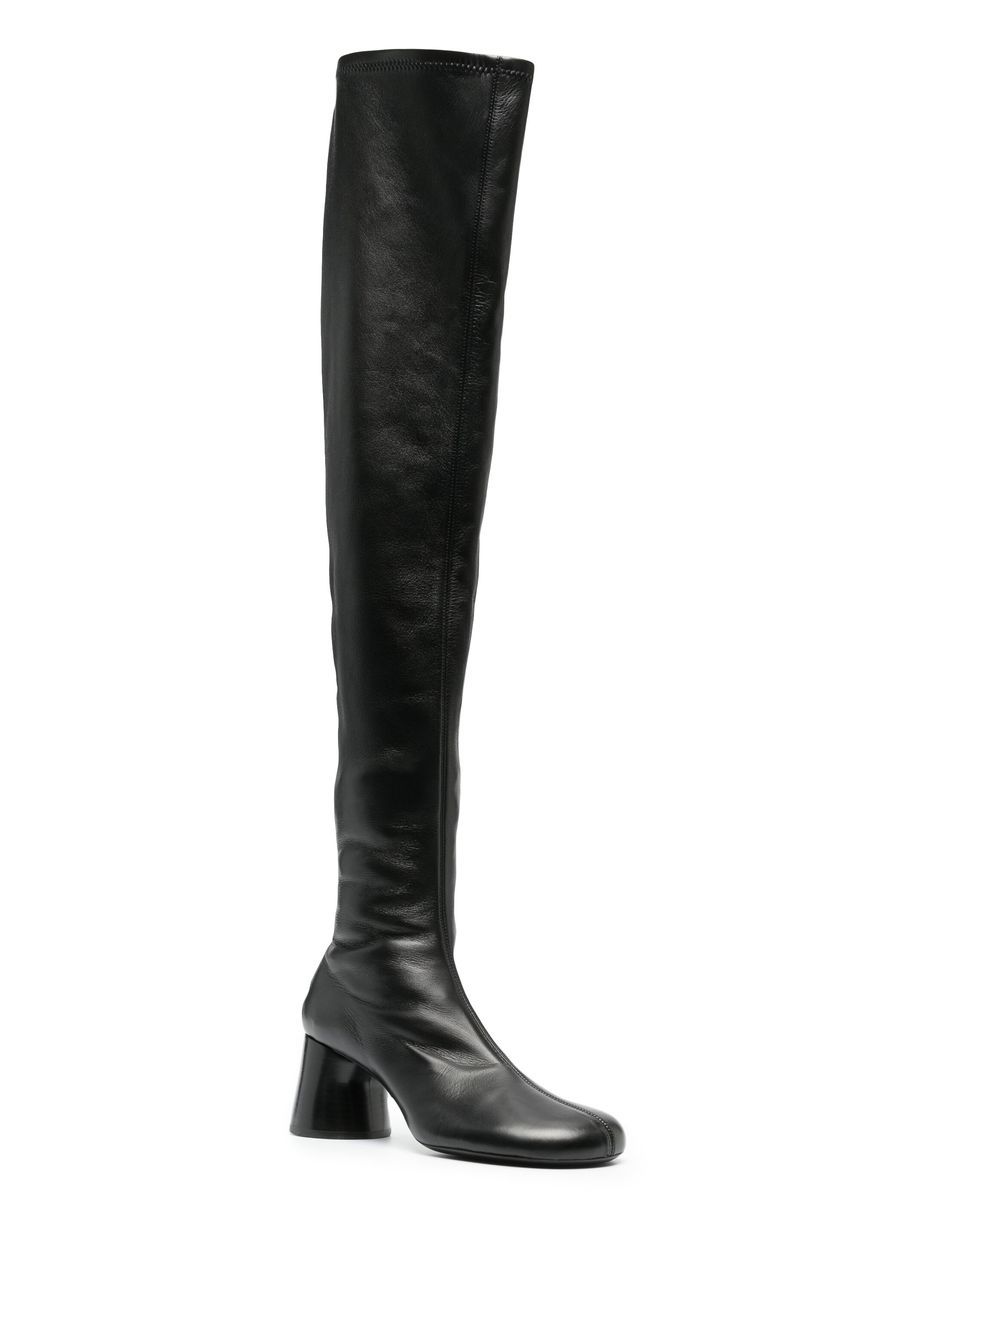 KHAITE Admiral Above The Knee Boots - Farfetch